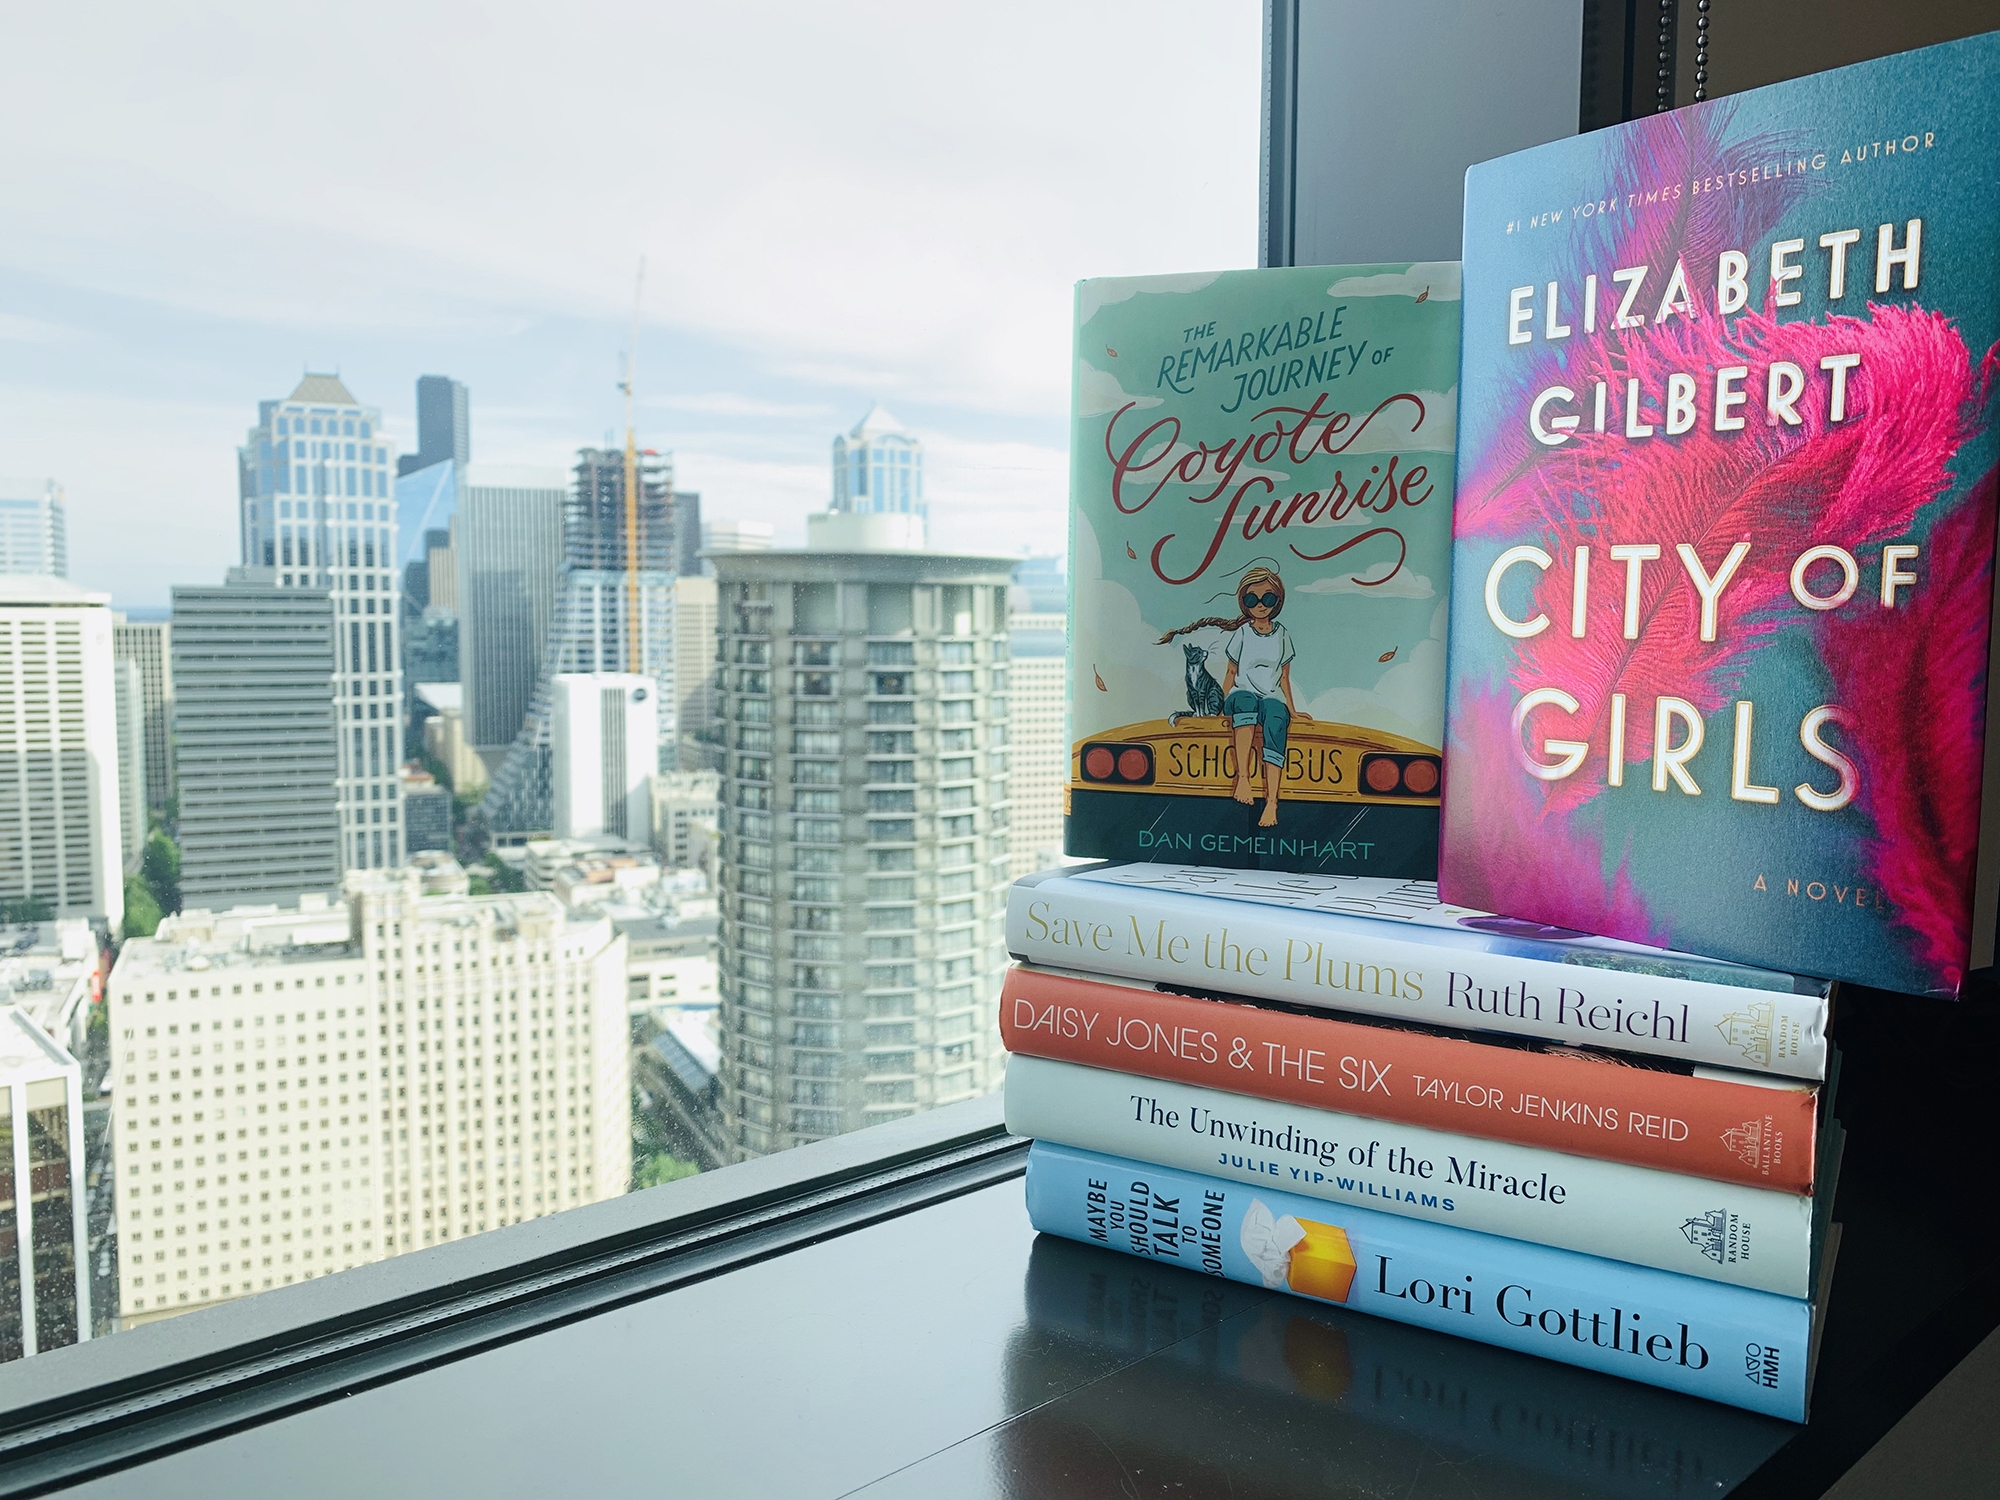 Stack of books in the window overlooking skyscrapers in Seattle. Books are among the "Best books of the year" for 2019.